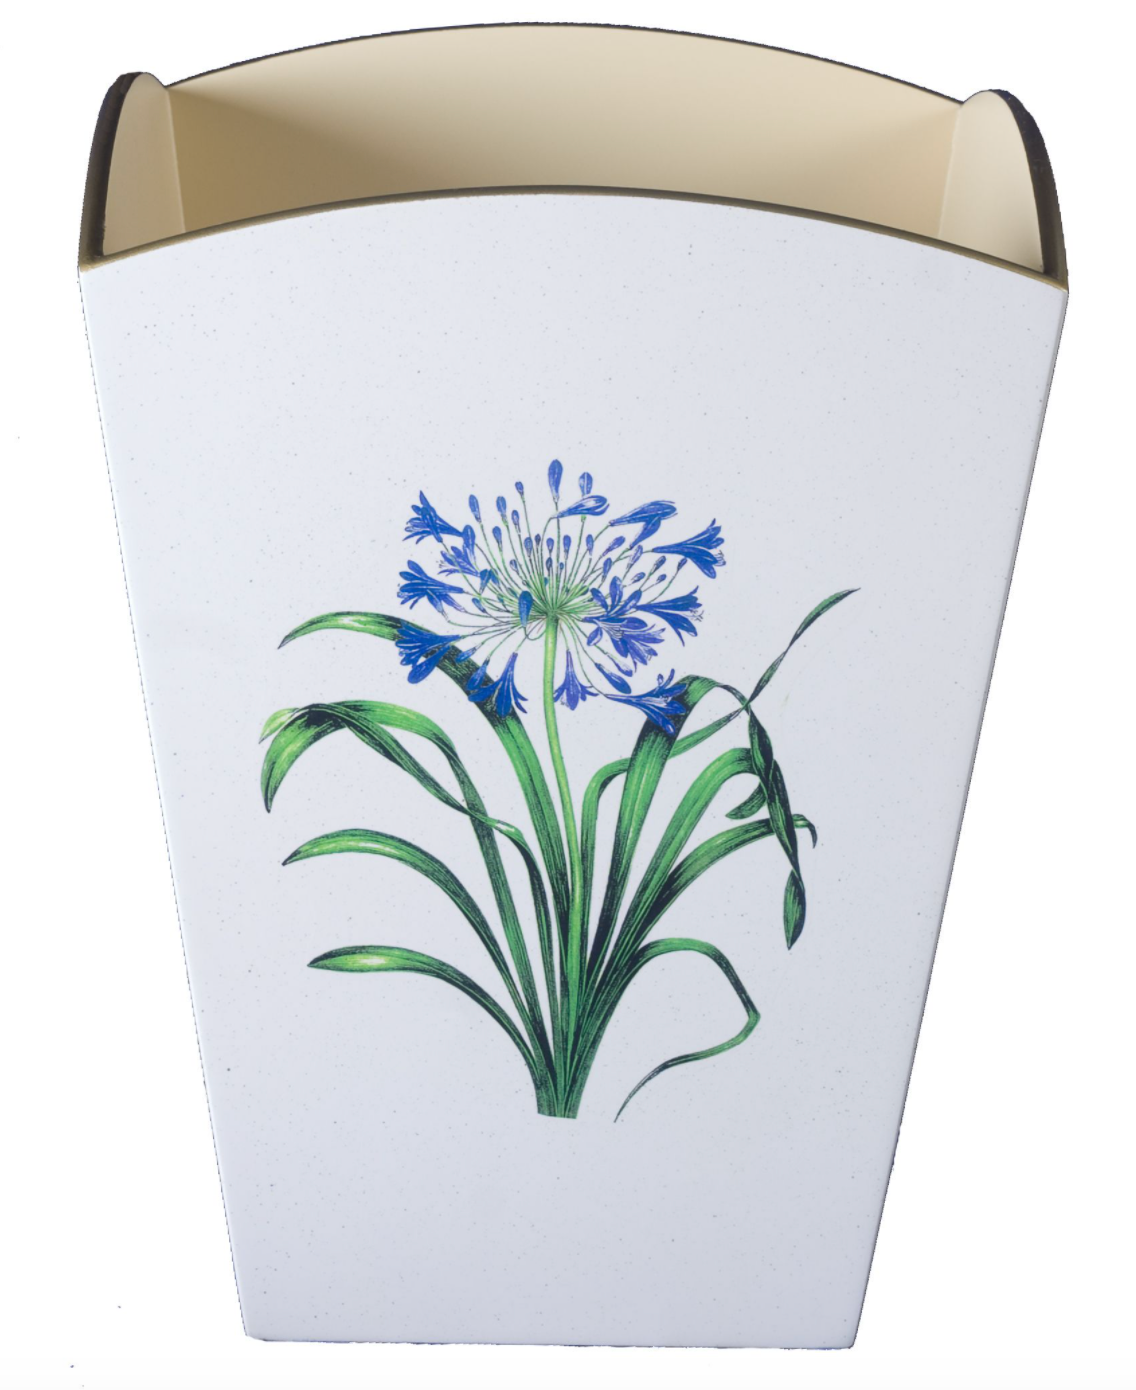 Square Wooden Waste Paper Bin: Agapanthus